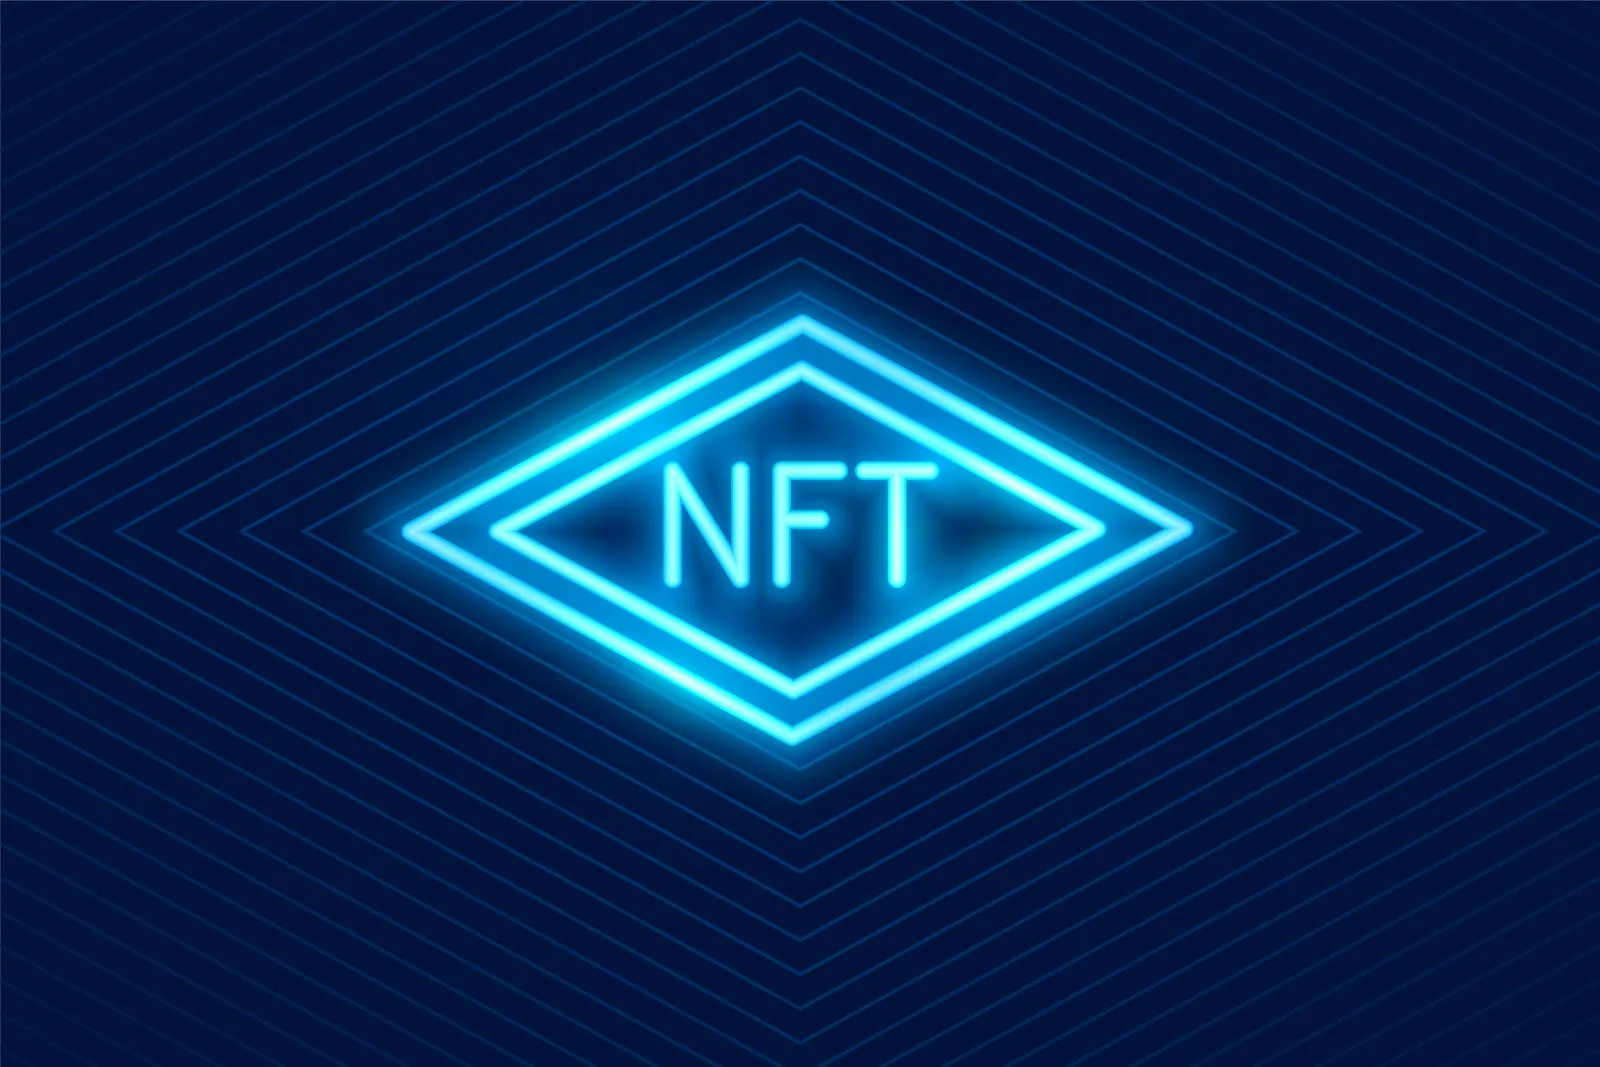 How to Develop an NFT Gaming Platform From Scratch?